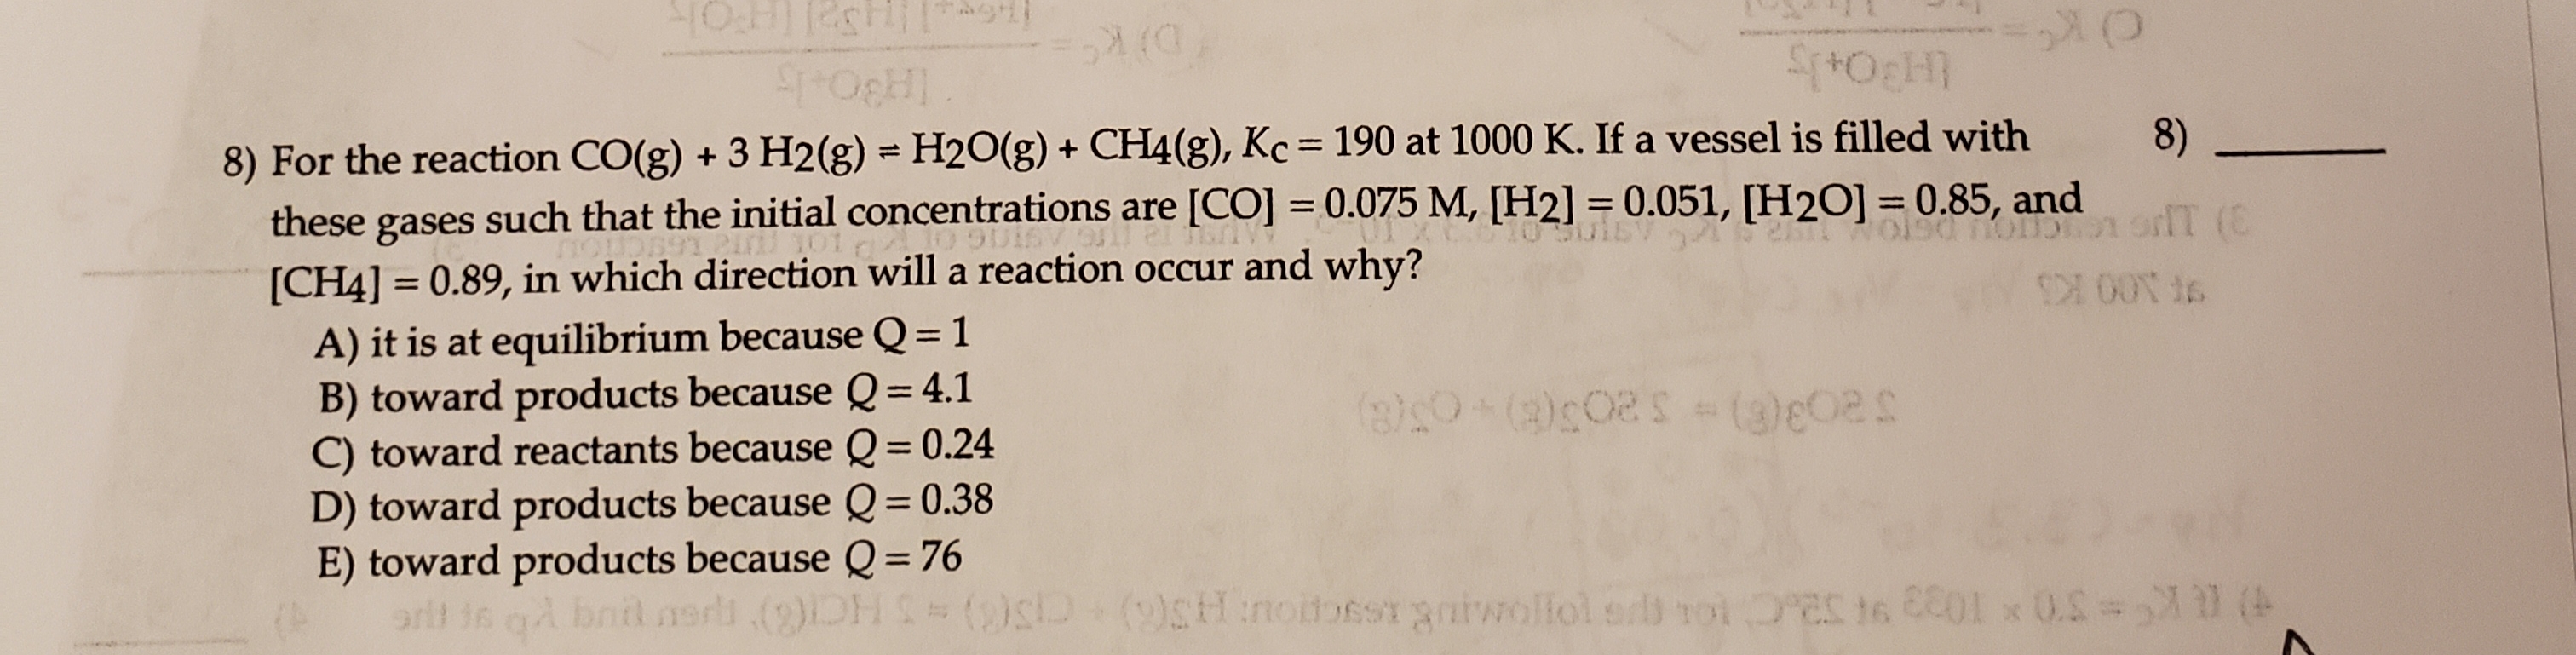 8) For the reaction CO(g) + 3 H2(g) = H2O(g) + CH4(g), Kc = 190 at 1000 K. If a vessel is filled with
these gases such that the initial concentrations are [CO] = 0.075 M, [H2] = 0.051, [H2O] =0.85, and
8)
%|
%3D
oT (C
%3D
%3D
9aoD
[CH4] = 0.89, in which direction will a reaction occur and why?
A) it is at equilibrium because Q= 1
B) toward products because Q= 4.1
C) toward reactants because Q= 0.24
D) toward products because Q= 0.38
E) toward products because Q = 76
%3D
నెతె 520-ది
%3D
%3D
%3D
bnil am
( (0) Hnoitbes aaiwollol er roi 0 0.S= (
